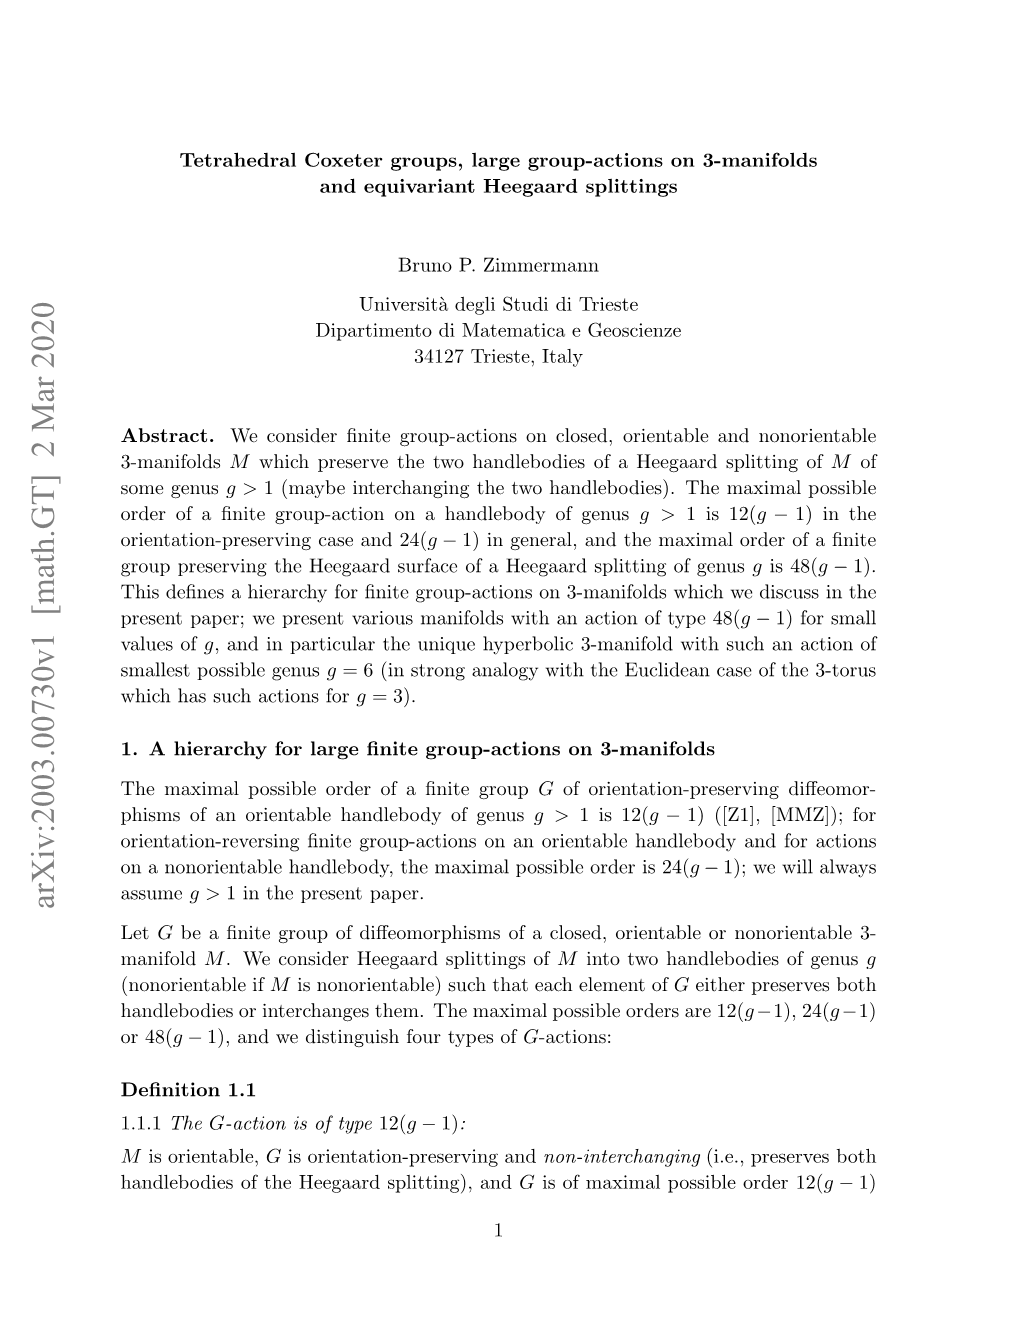 Tetrahedral Coxeter Groups, Large Group-Actions on 3-Manifolds And